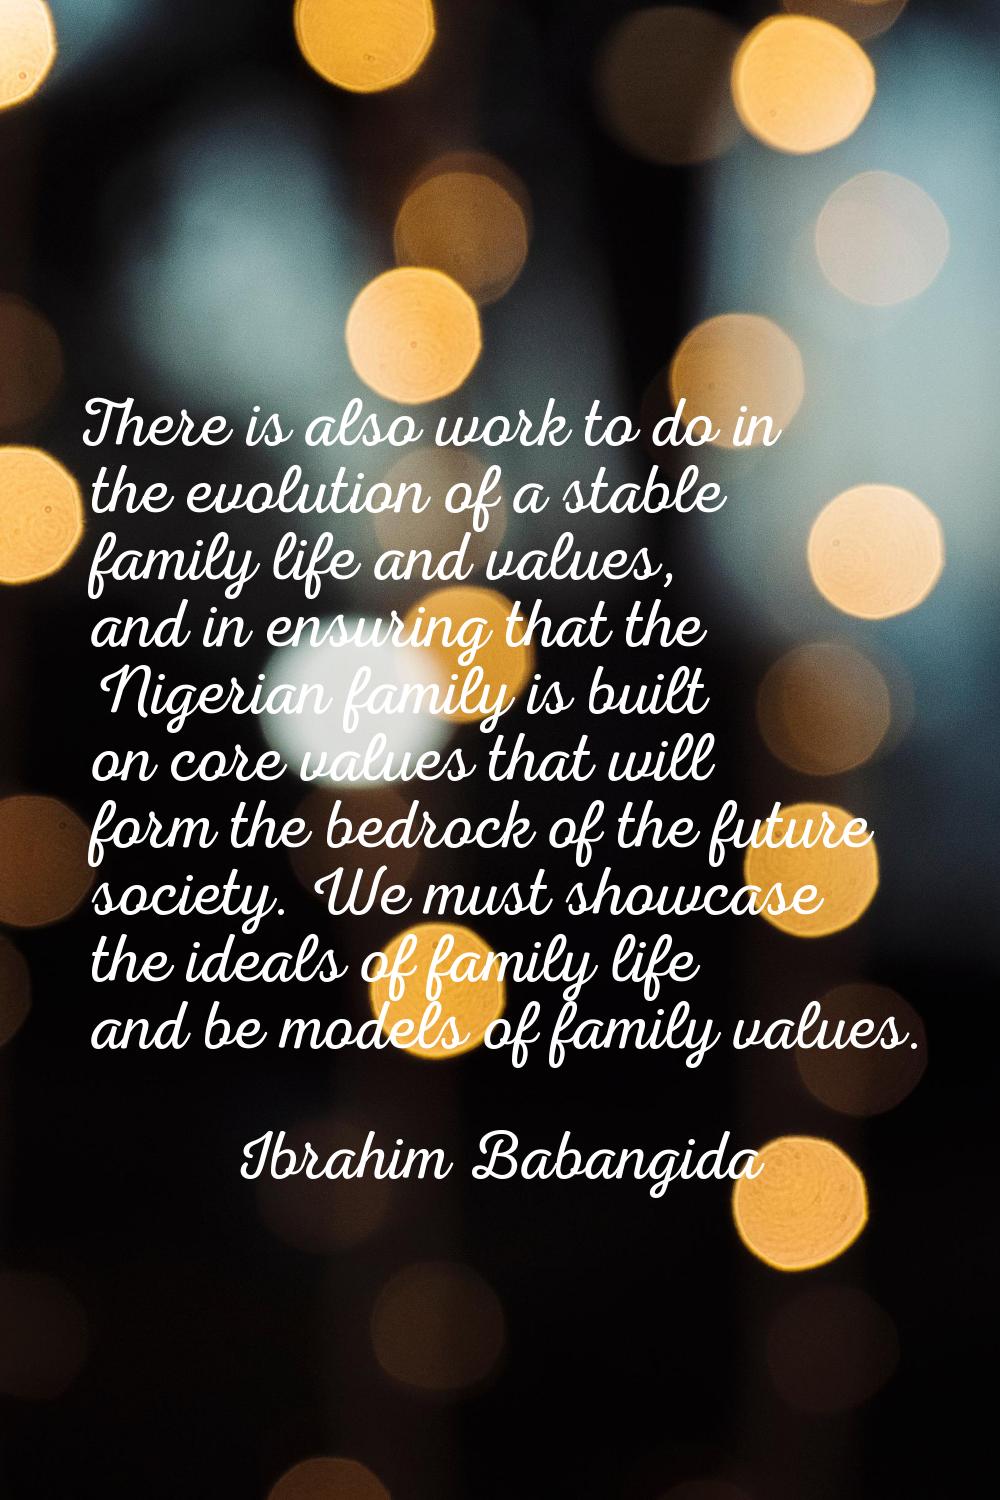 There is also work to do in the evolution of a stable family life and values, and in ensuring that 